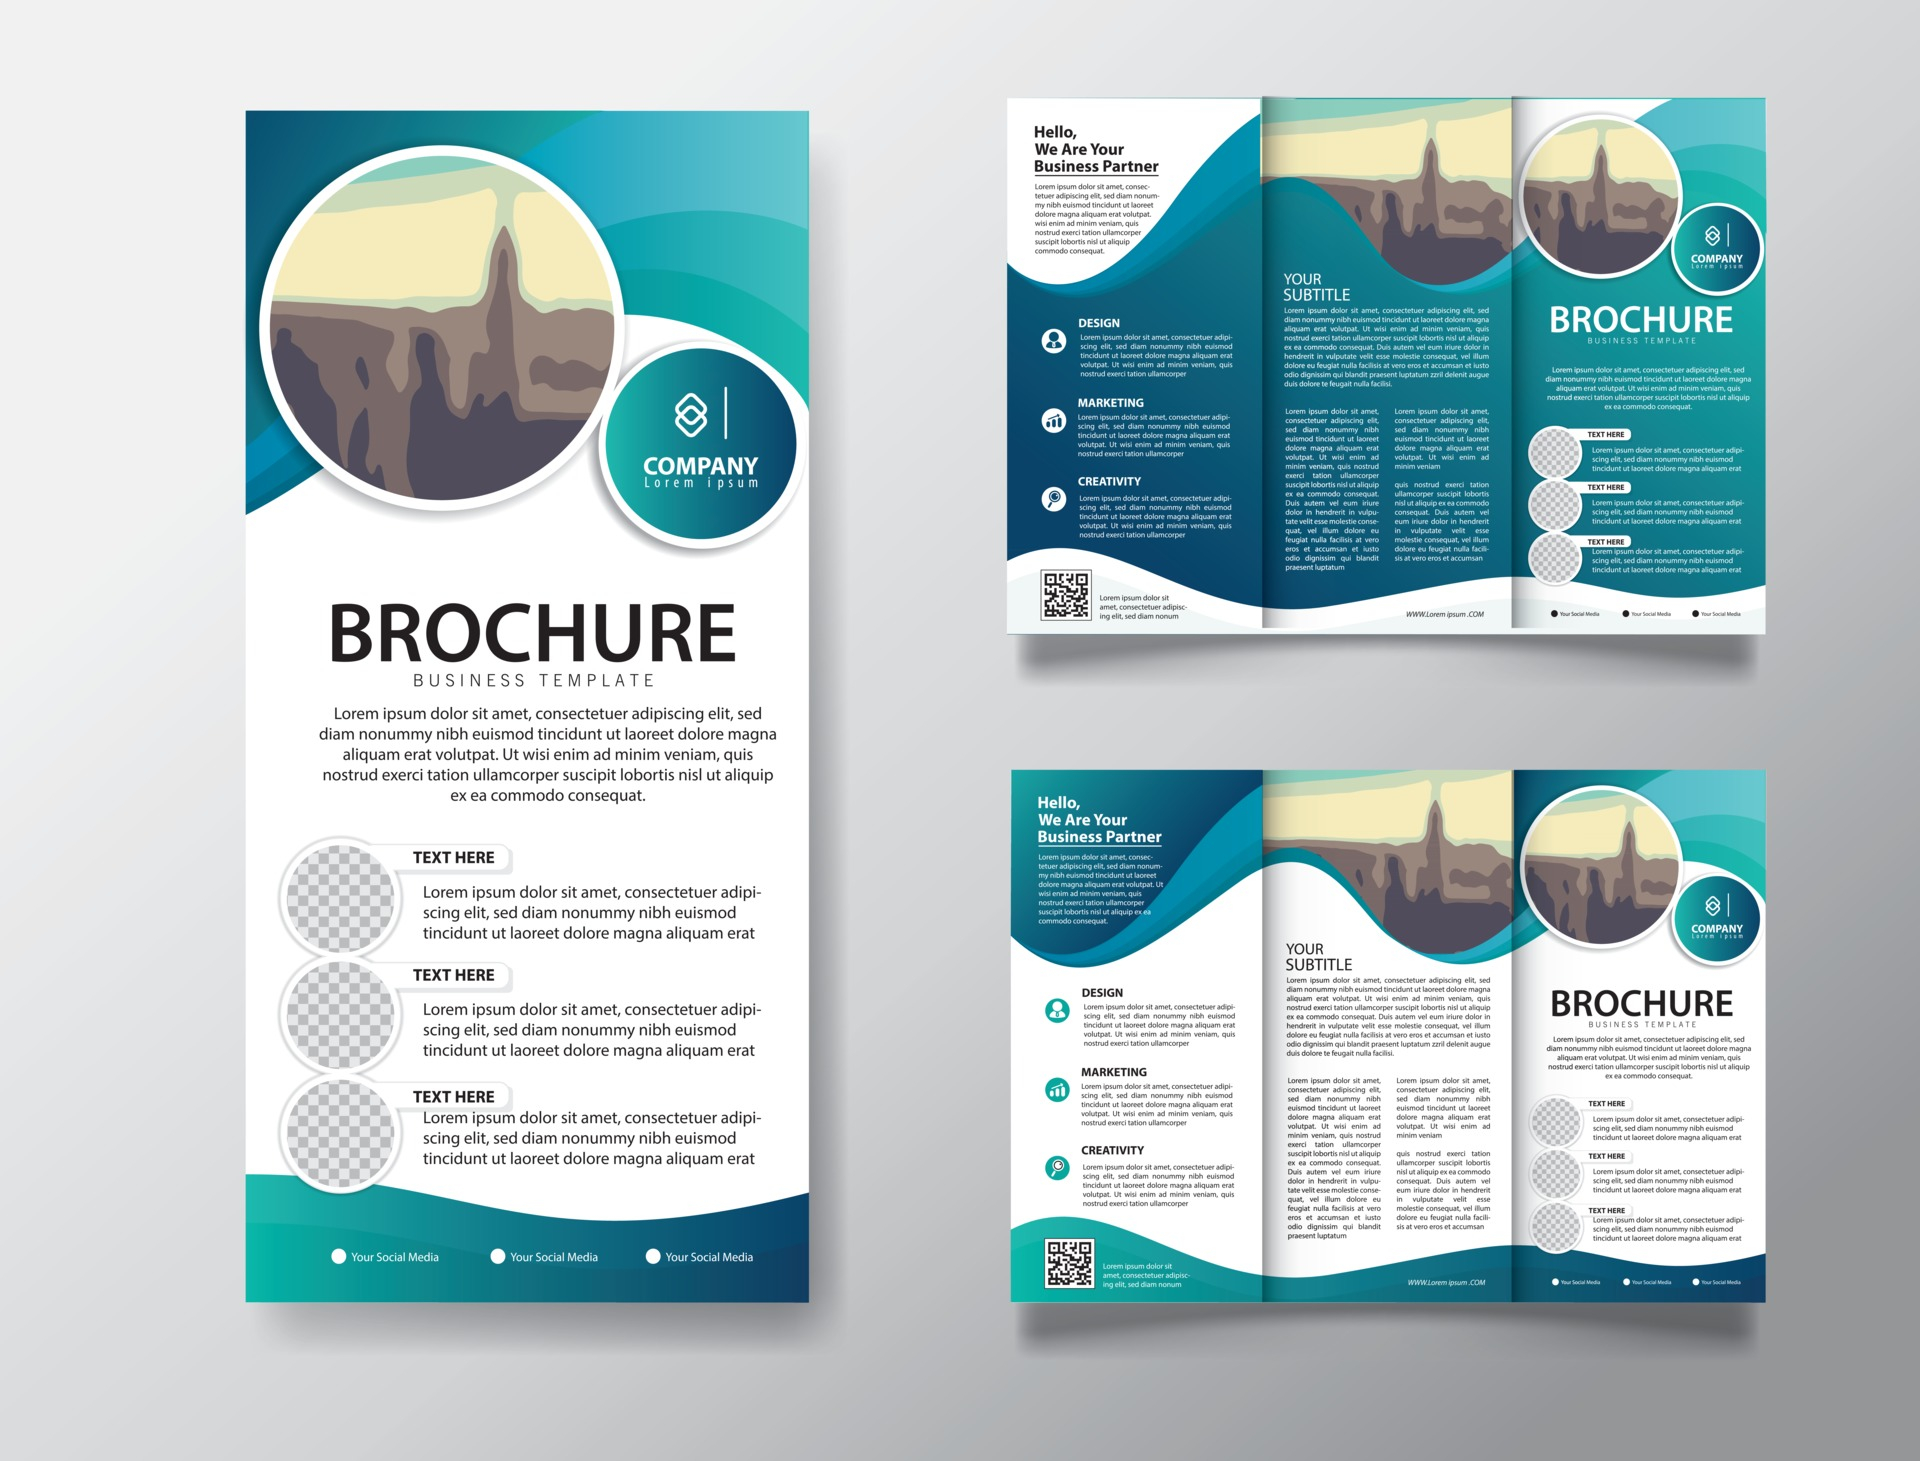 Brochure Vector Art, Icons, and Graphics for Free Download Throughout E Brochure Design Templates